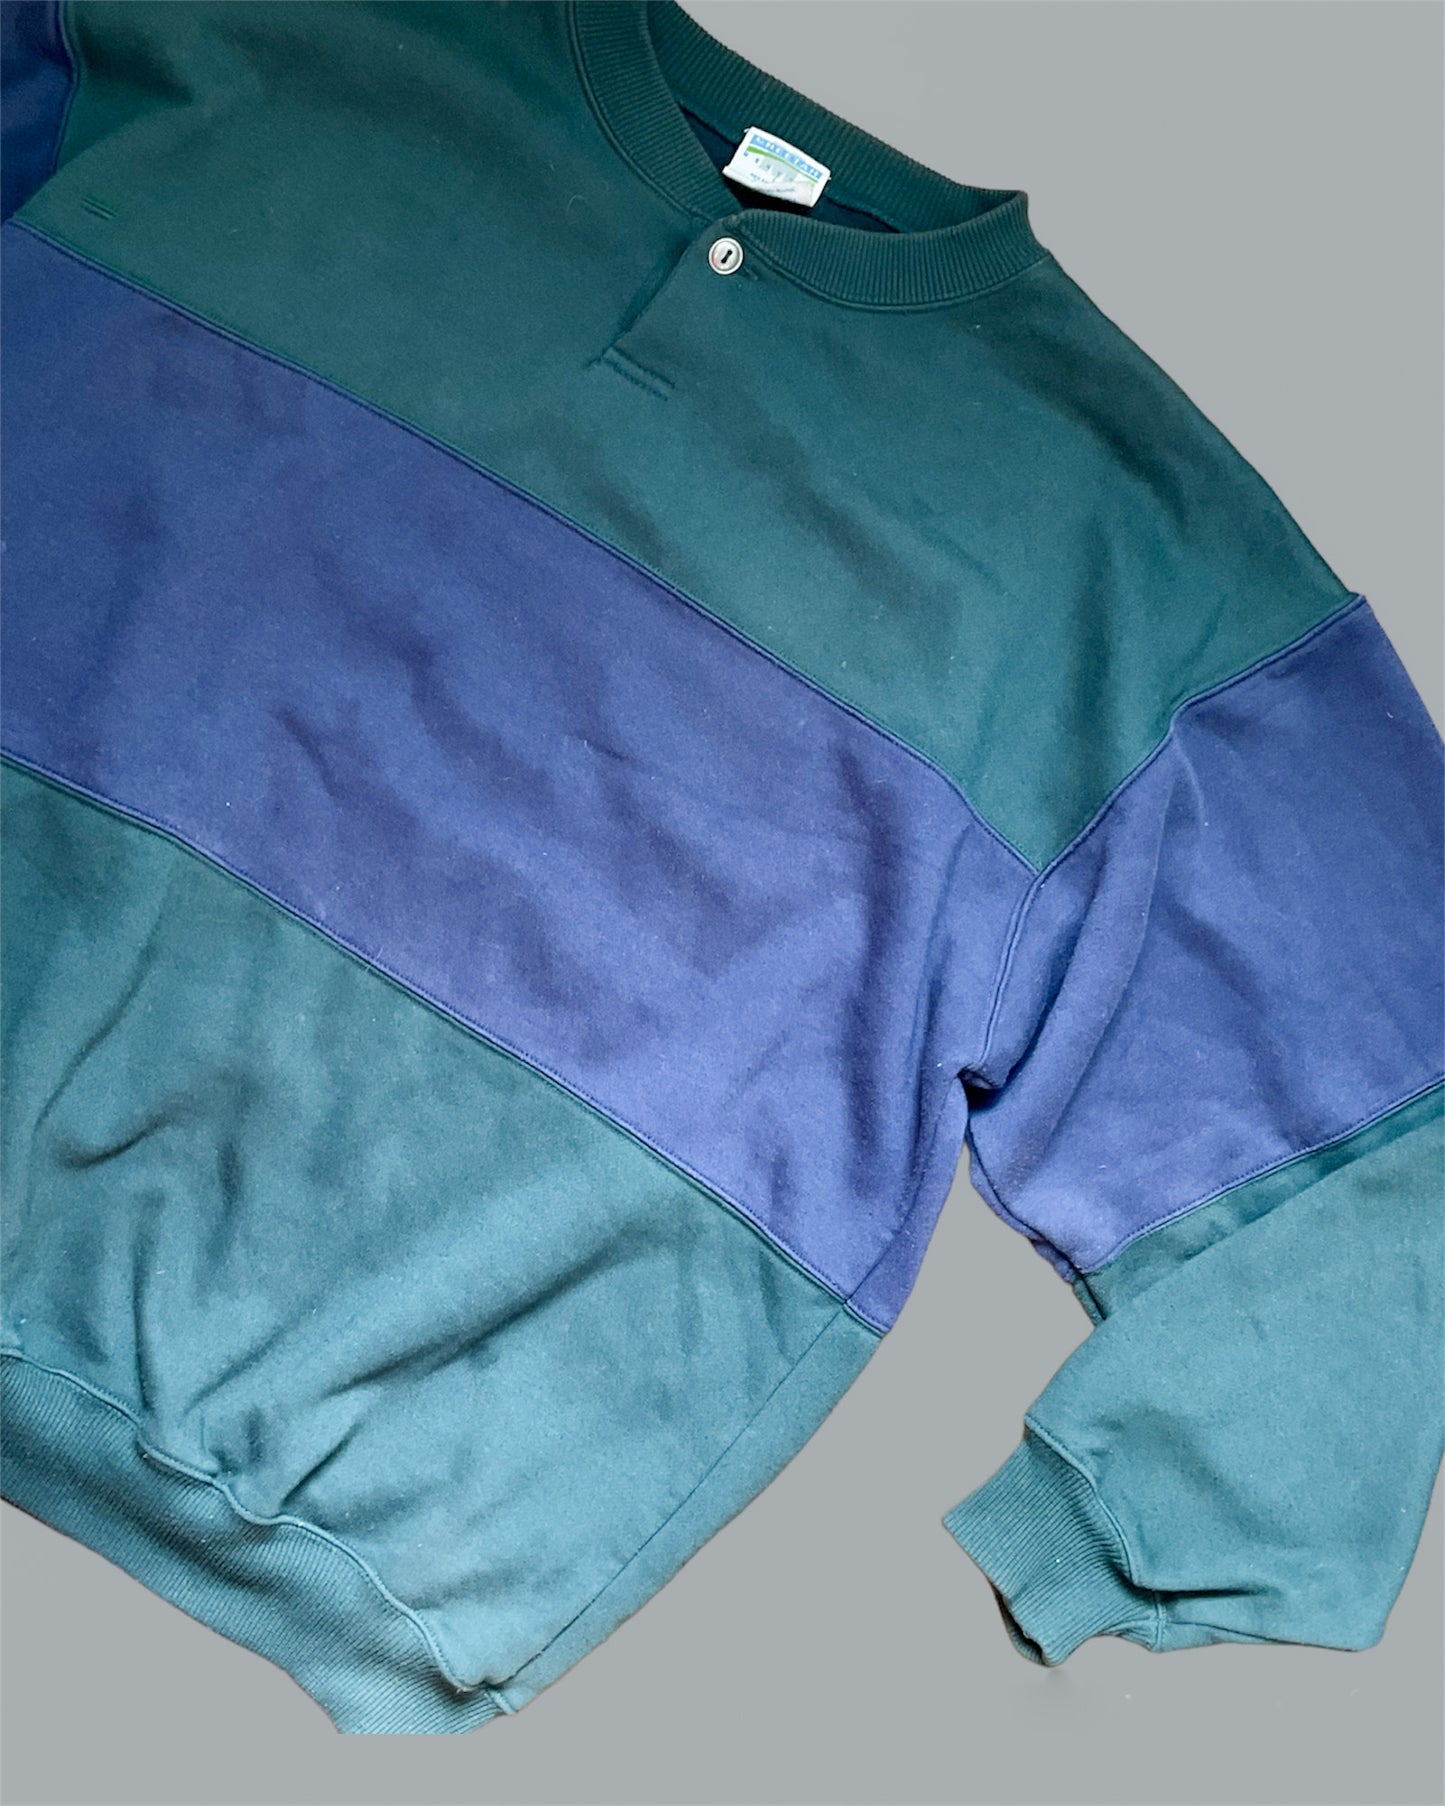 Vintage Navy and Green Pullover